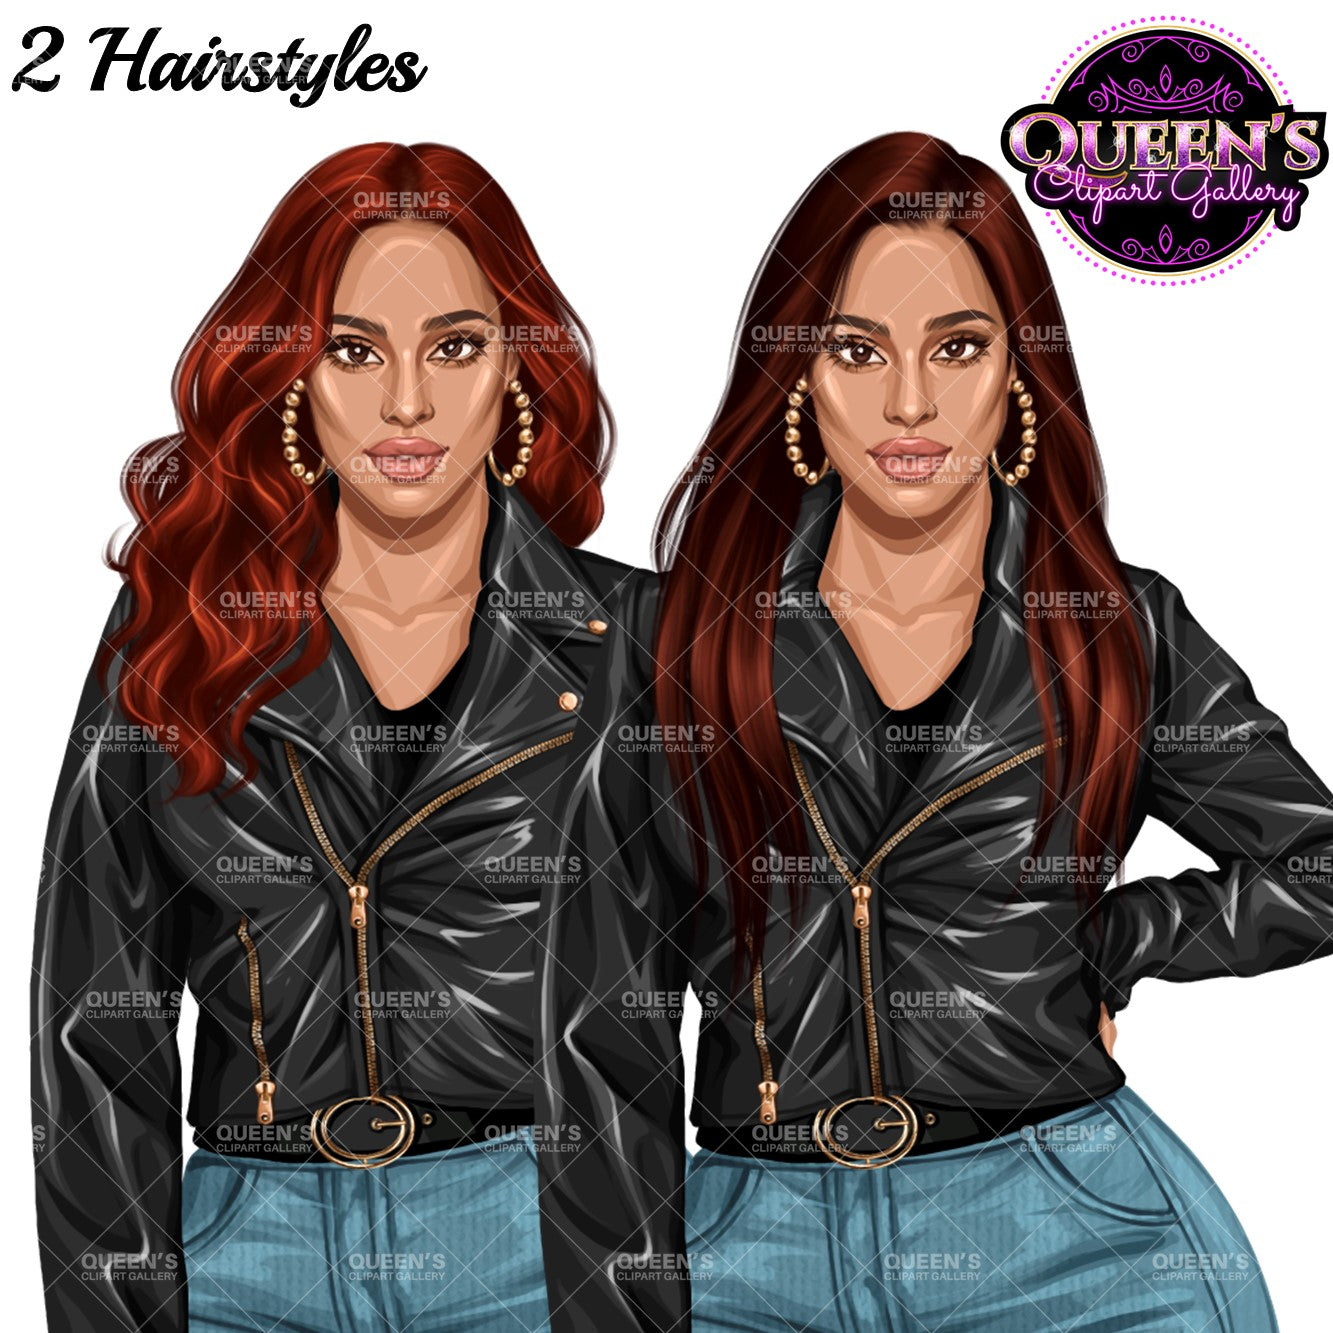 Denim girl clipart, Fashion girl clipart, Jeans girl clipart, Fashion illustration, Curvy girl clipart, Denim clipart, Woman in leather jacket